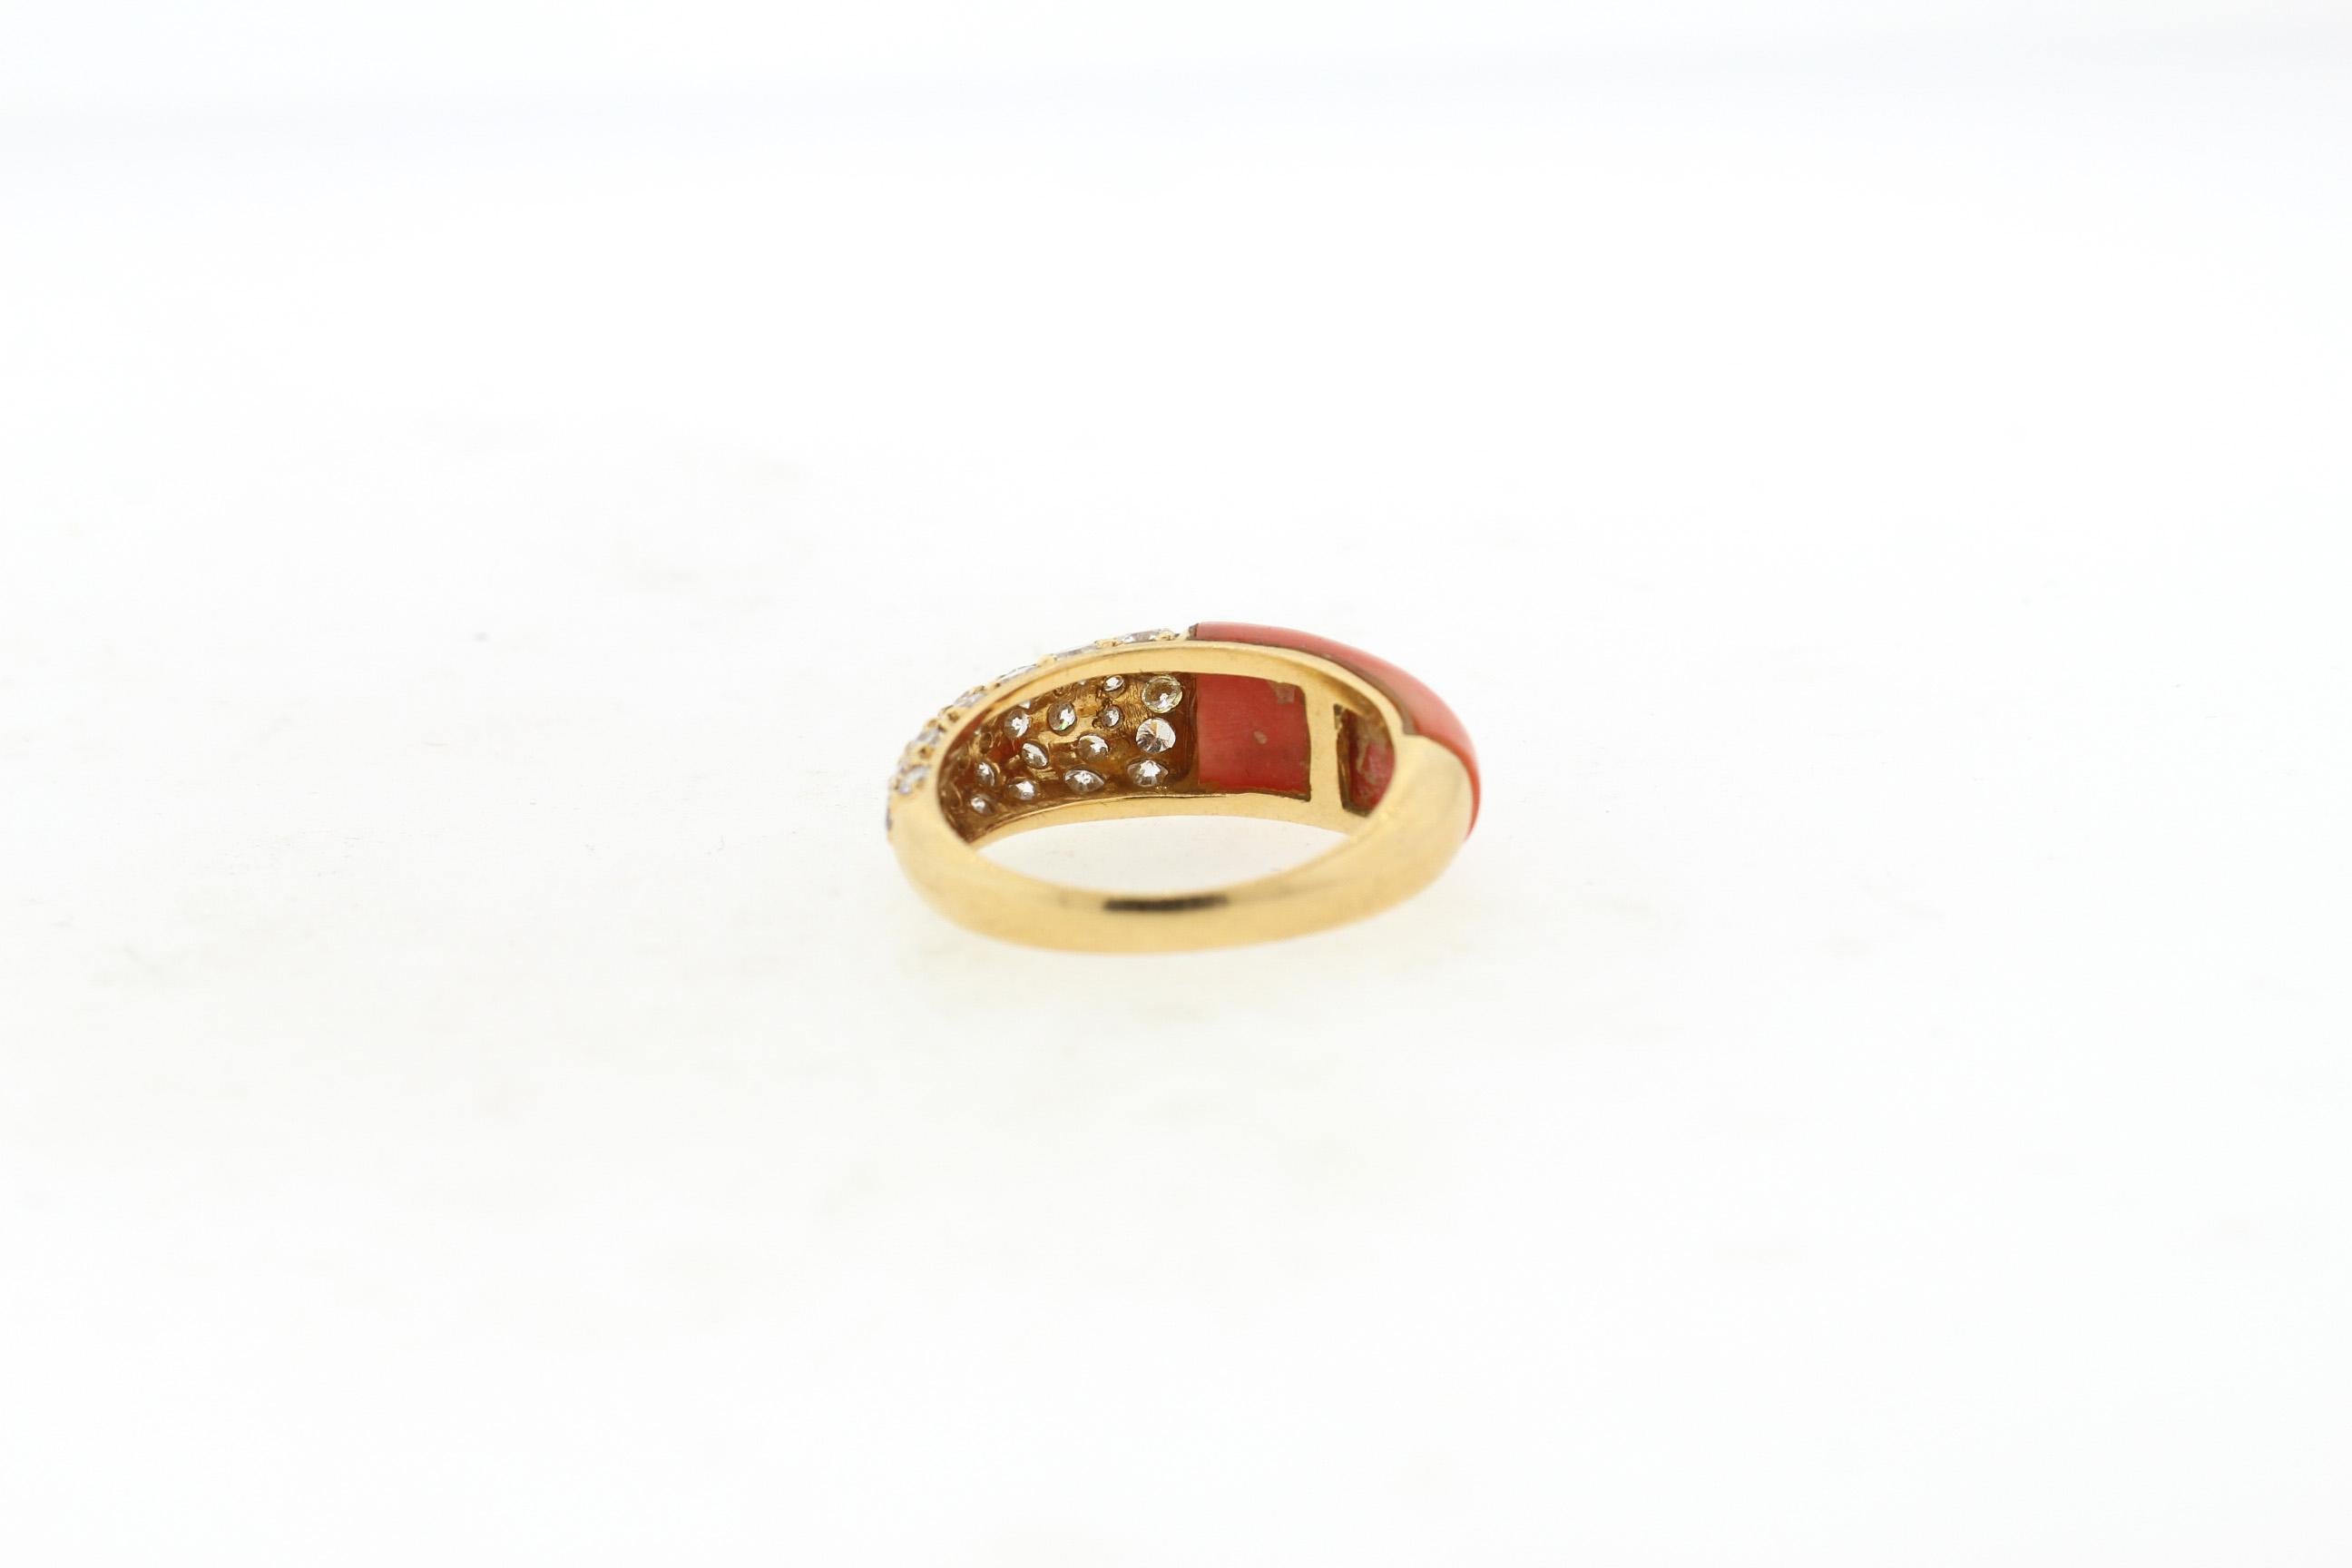 Vintage 18k gold coral and diamond ring by Cartier circa 1970. The coral and the diamonds oppose each other on the finger. One side is set with 30 modern round brilliant diamonds weighing about 1.10 cts total. The ring is slightly domed and would